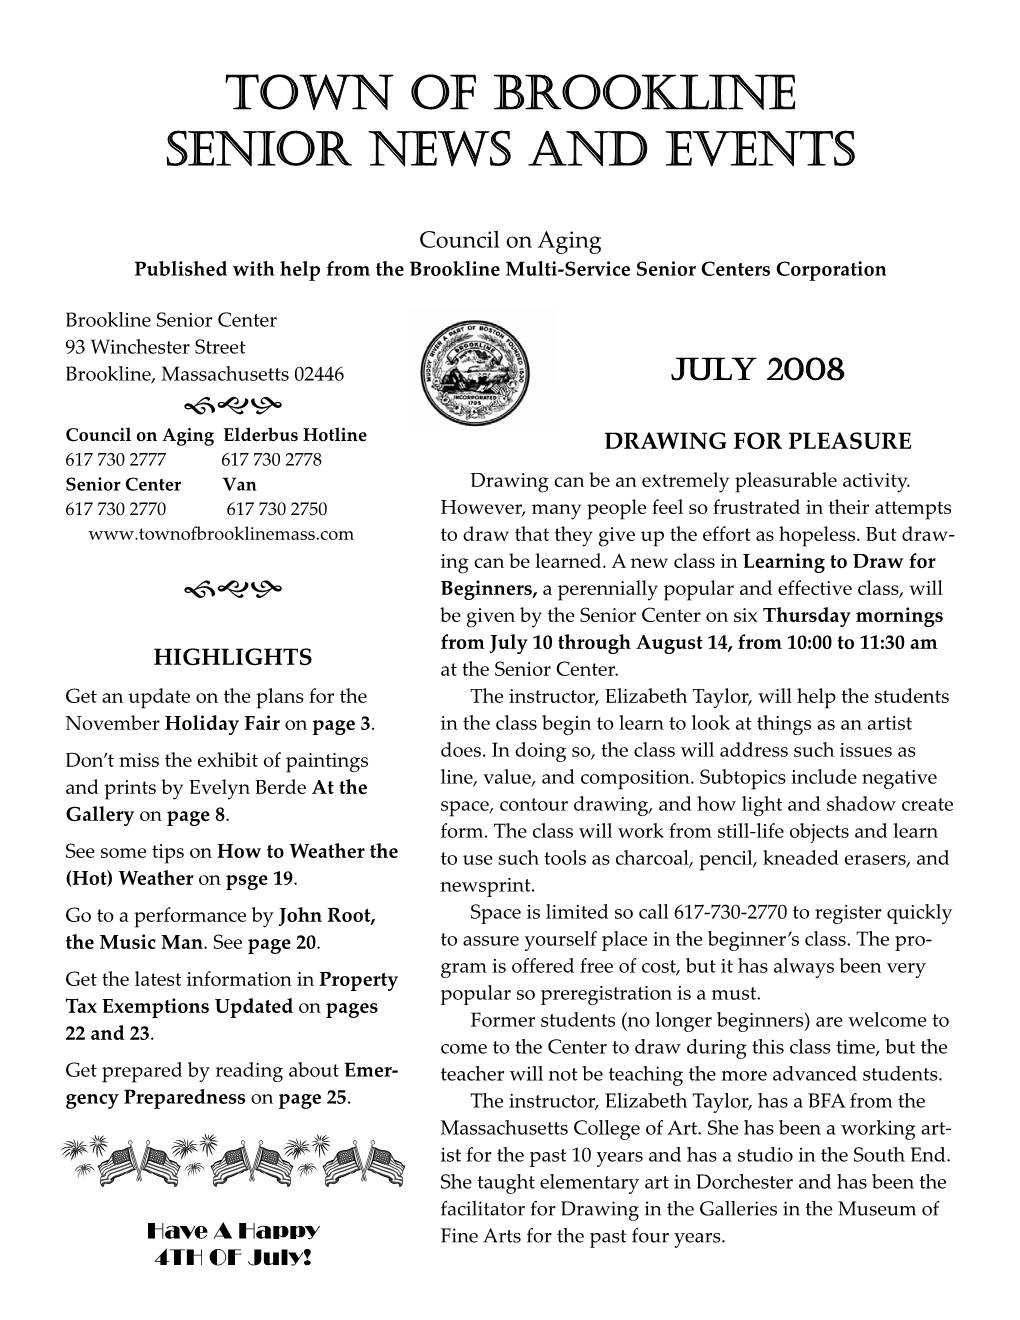 Council on Aging Newsletter July 2008